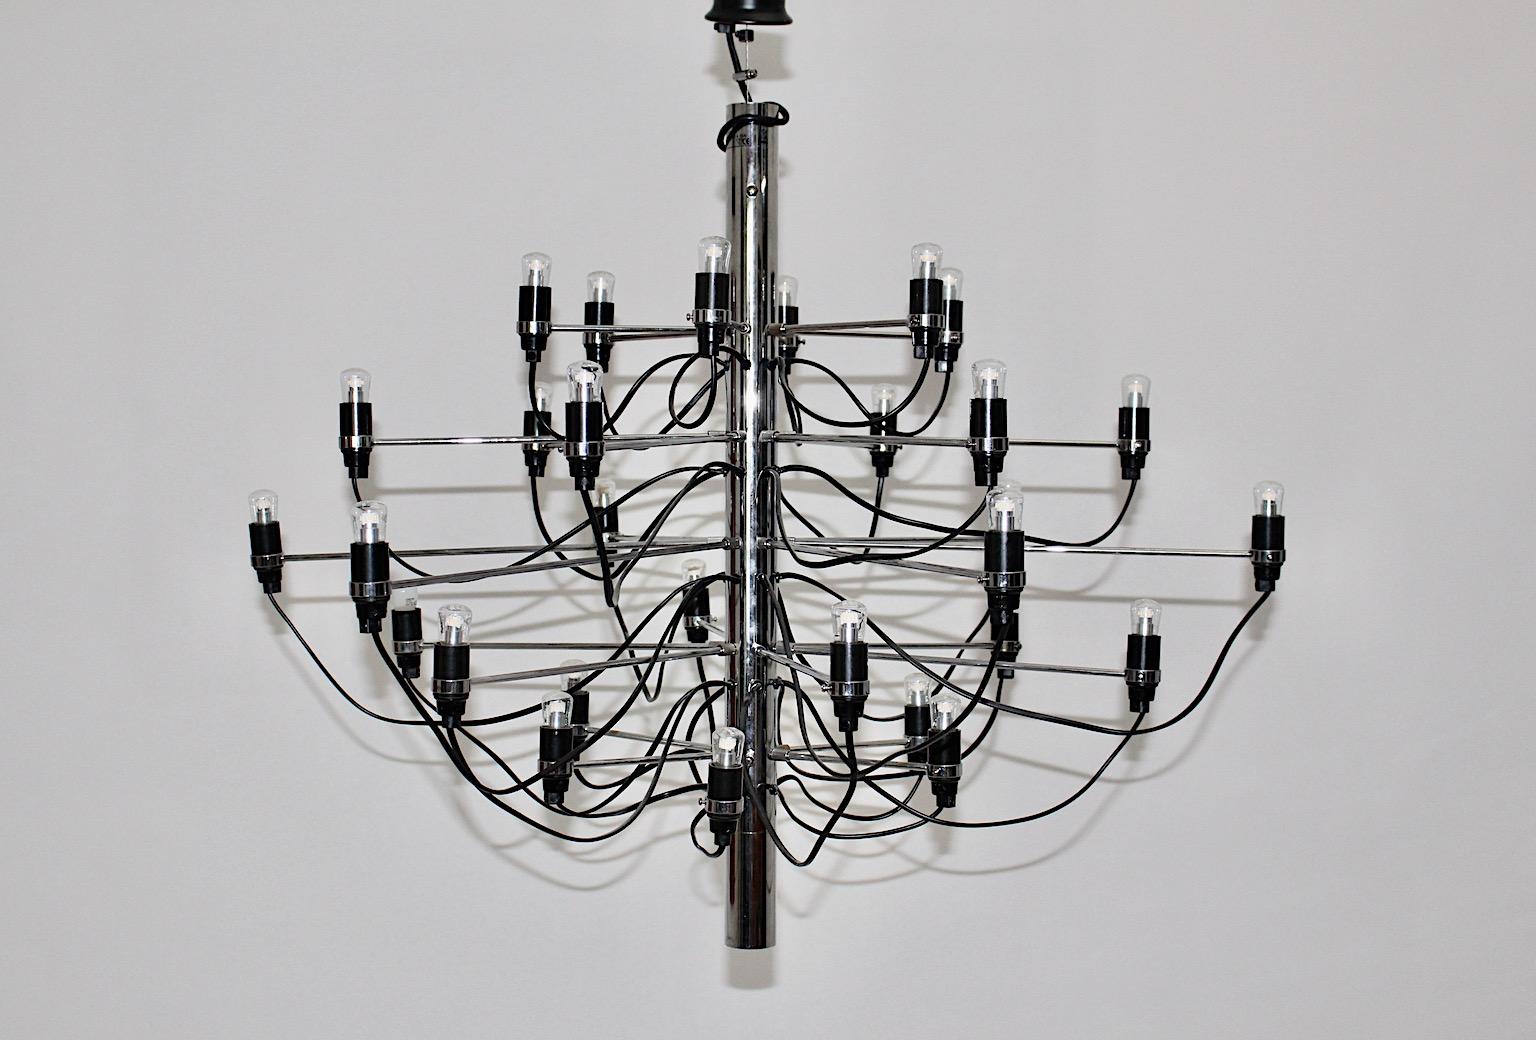 Mid-Century Modern Vintage silver and black Chandelier or Pendant designed by Gino Sarfatti 1958 and manufactured for Flos 21st century from chromed metal and 30 LED bulbs.
An iconic and beautiful sleek chandelier model 2097 designed by Gino